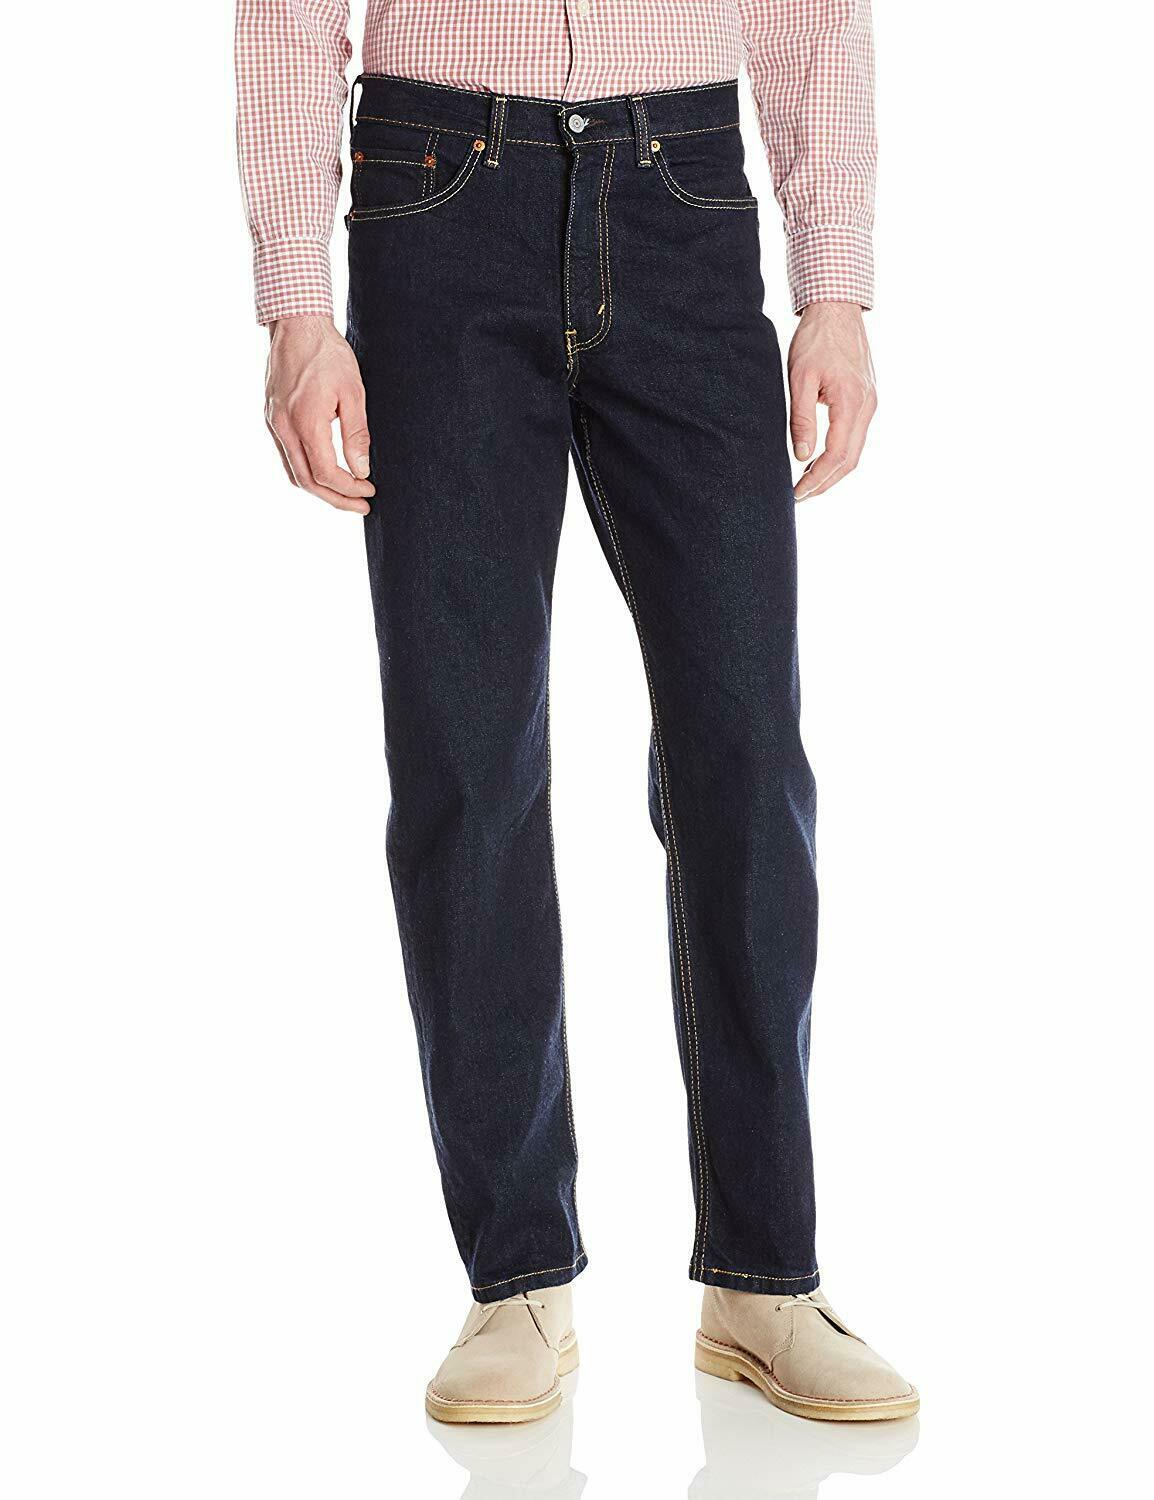 Men's Levis 550 Dark Wash Relaxed Fit TAPERED LEG STRETCH Jeans ...